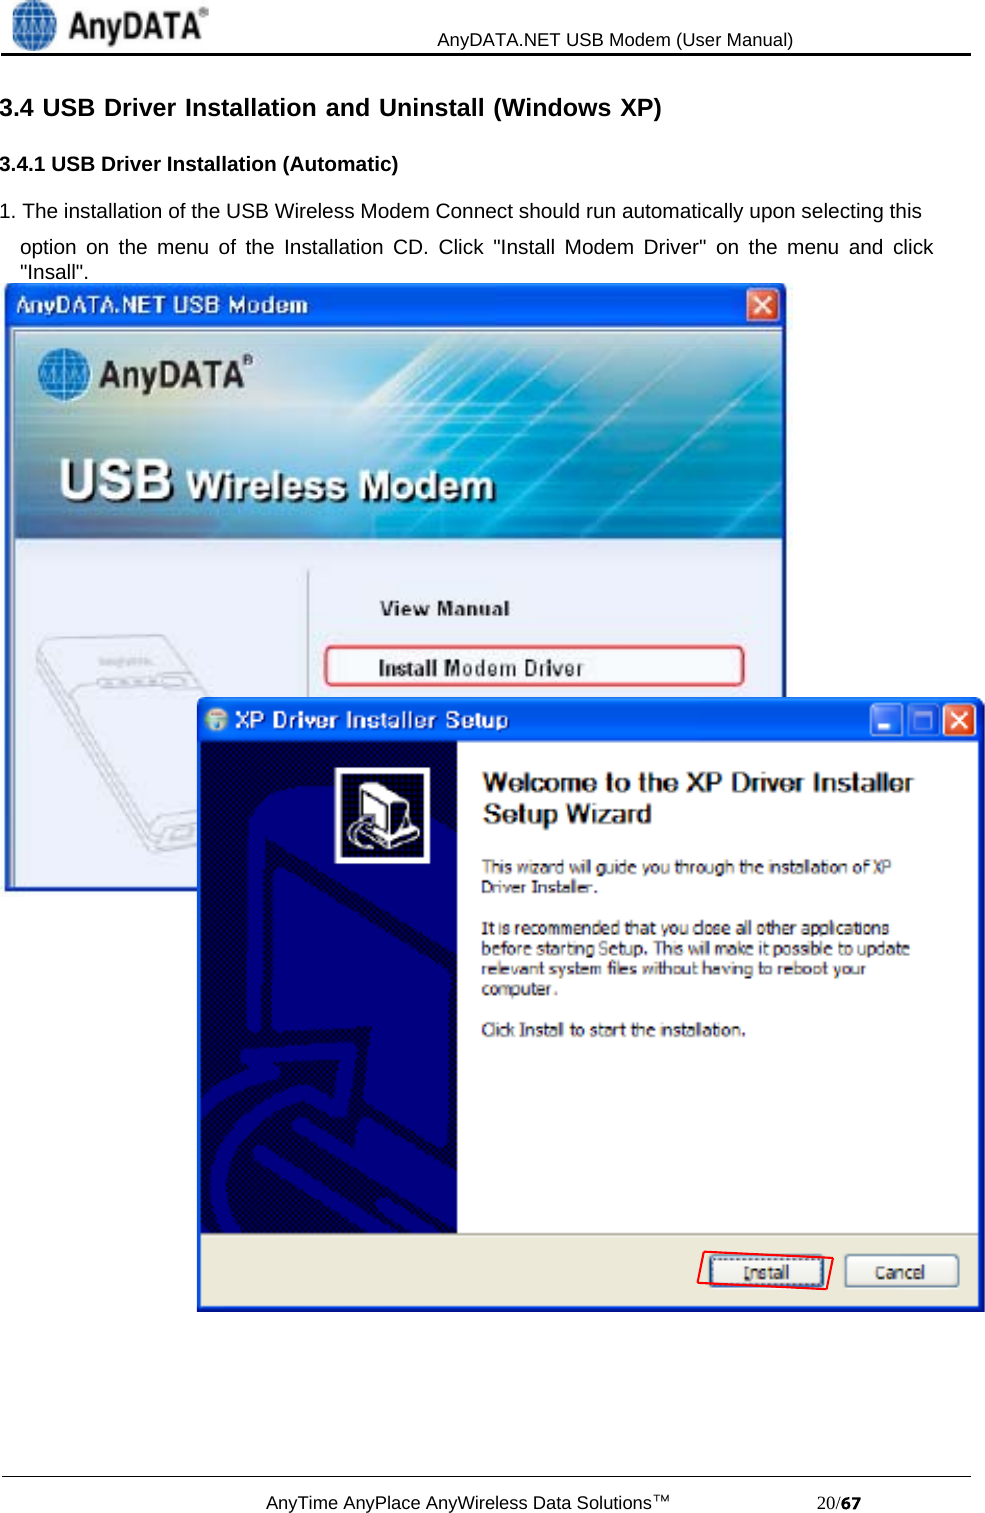                                             AnyDATA.NET USB Modem (User Manual)AnyTime AnyPlace AnyWireless Data Solutions™                            20/3.4 USB Driver Installation and Uninstall (Windows XP)3.4.1 USB Driver Installation (Automatic)1. The installation of the USB Wireless Modem Connect should run automatically upon selecting thisoption on the menu of the Installation CD. Click &quot;Install Modem Driver&quot; on the menu and click&quot;Insall&quot;.